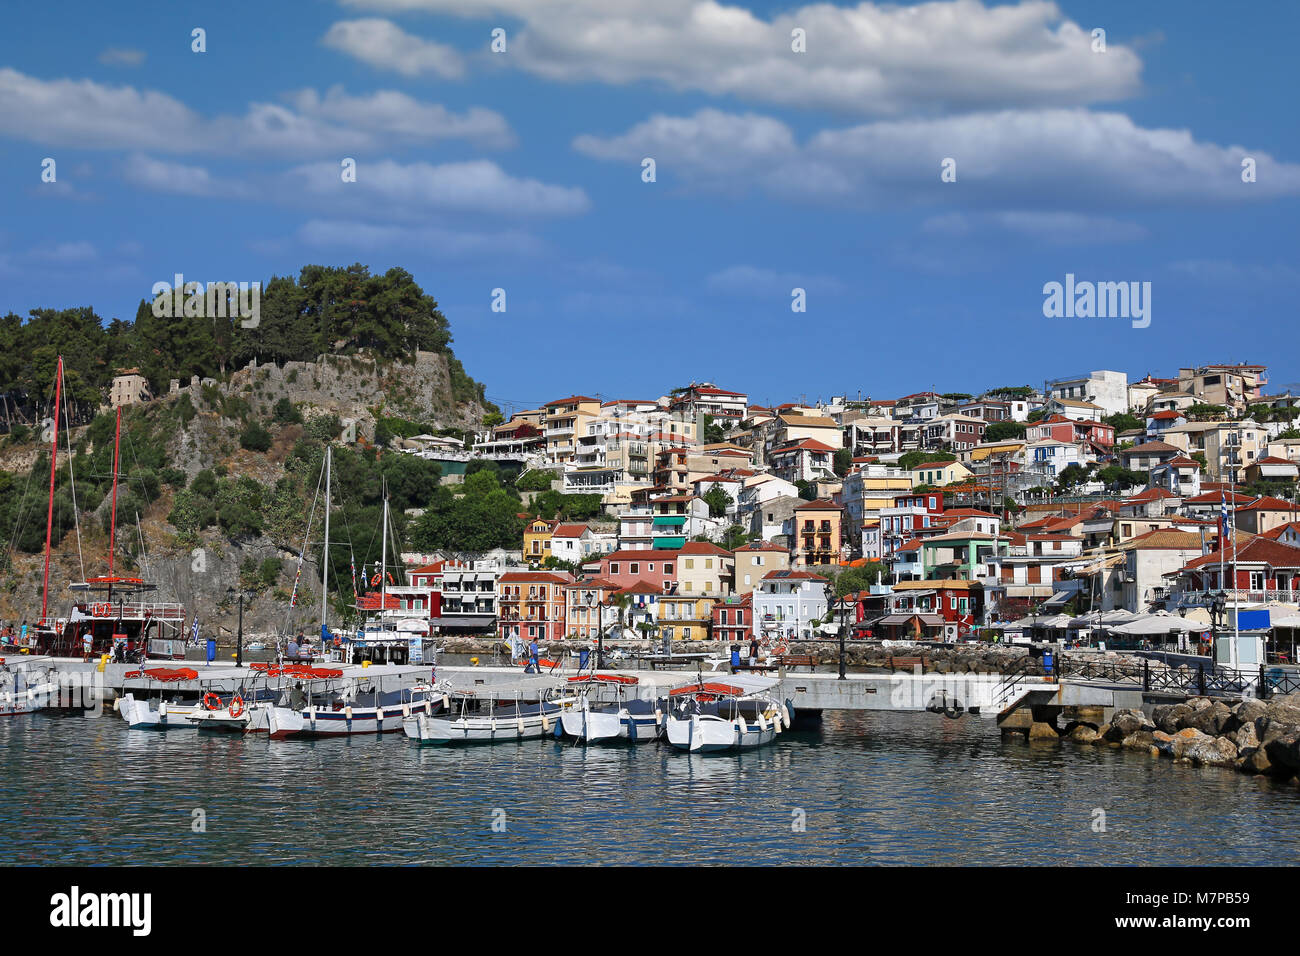 castle on hill and old colorful buildings Parga Greece Stock Photo